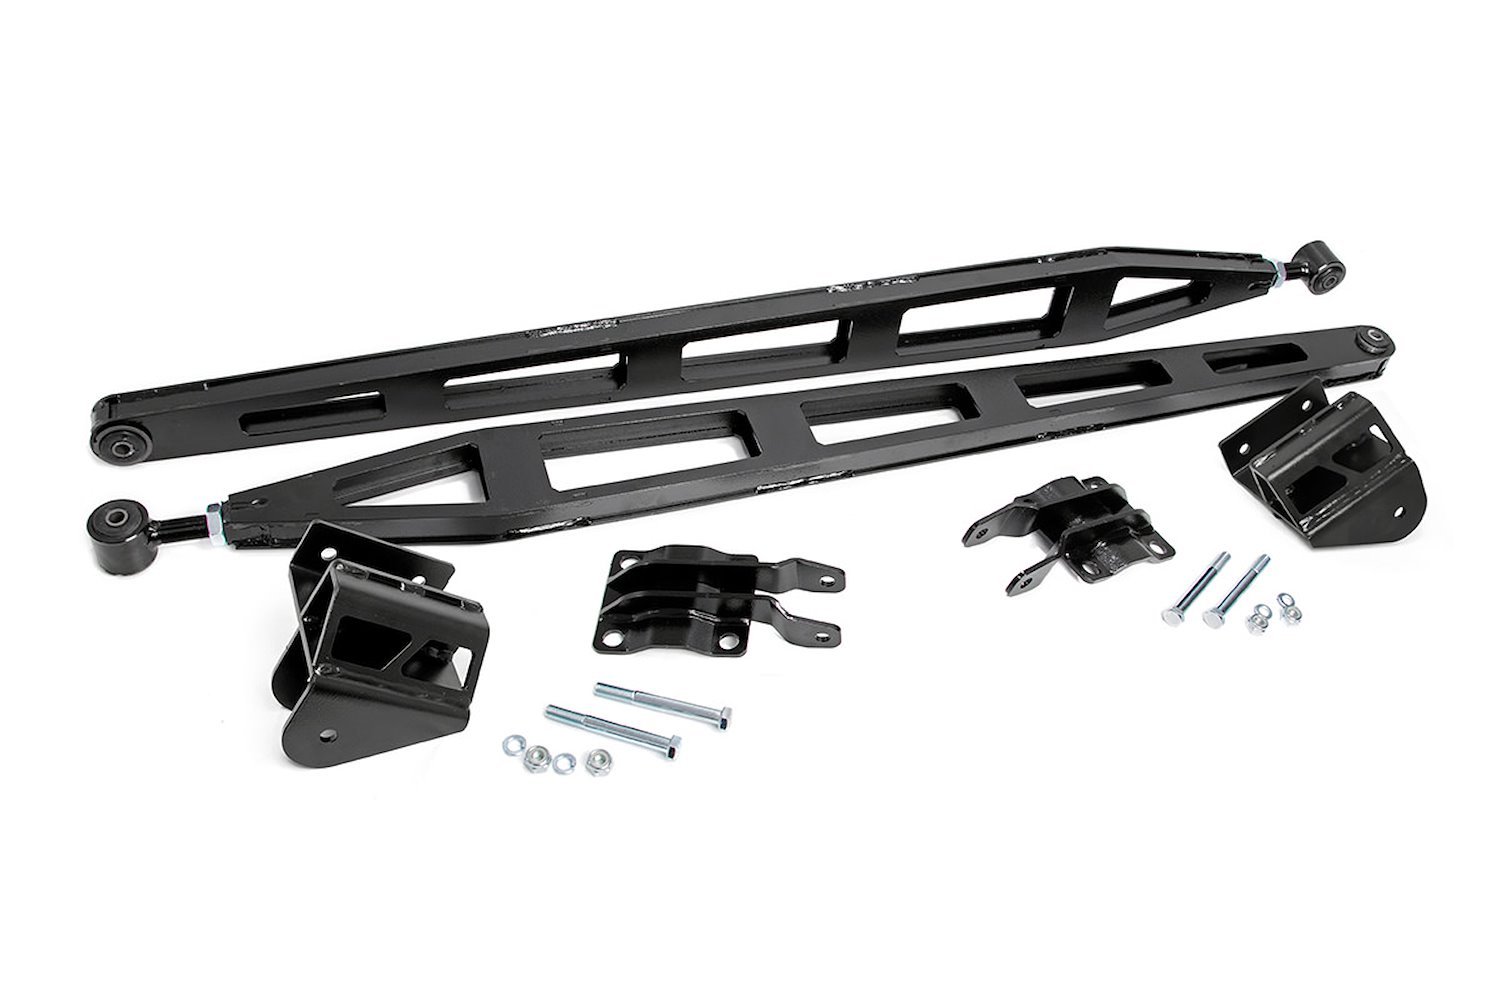 81000 Traction Bar Kit (Crew Cab Models) for 6-inch Lifts